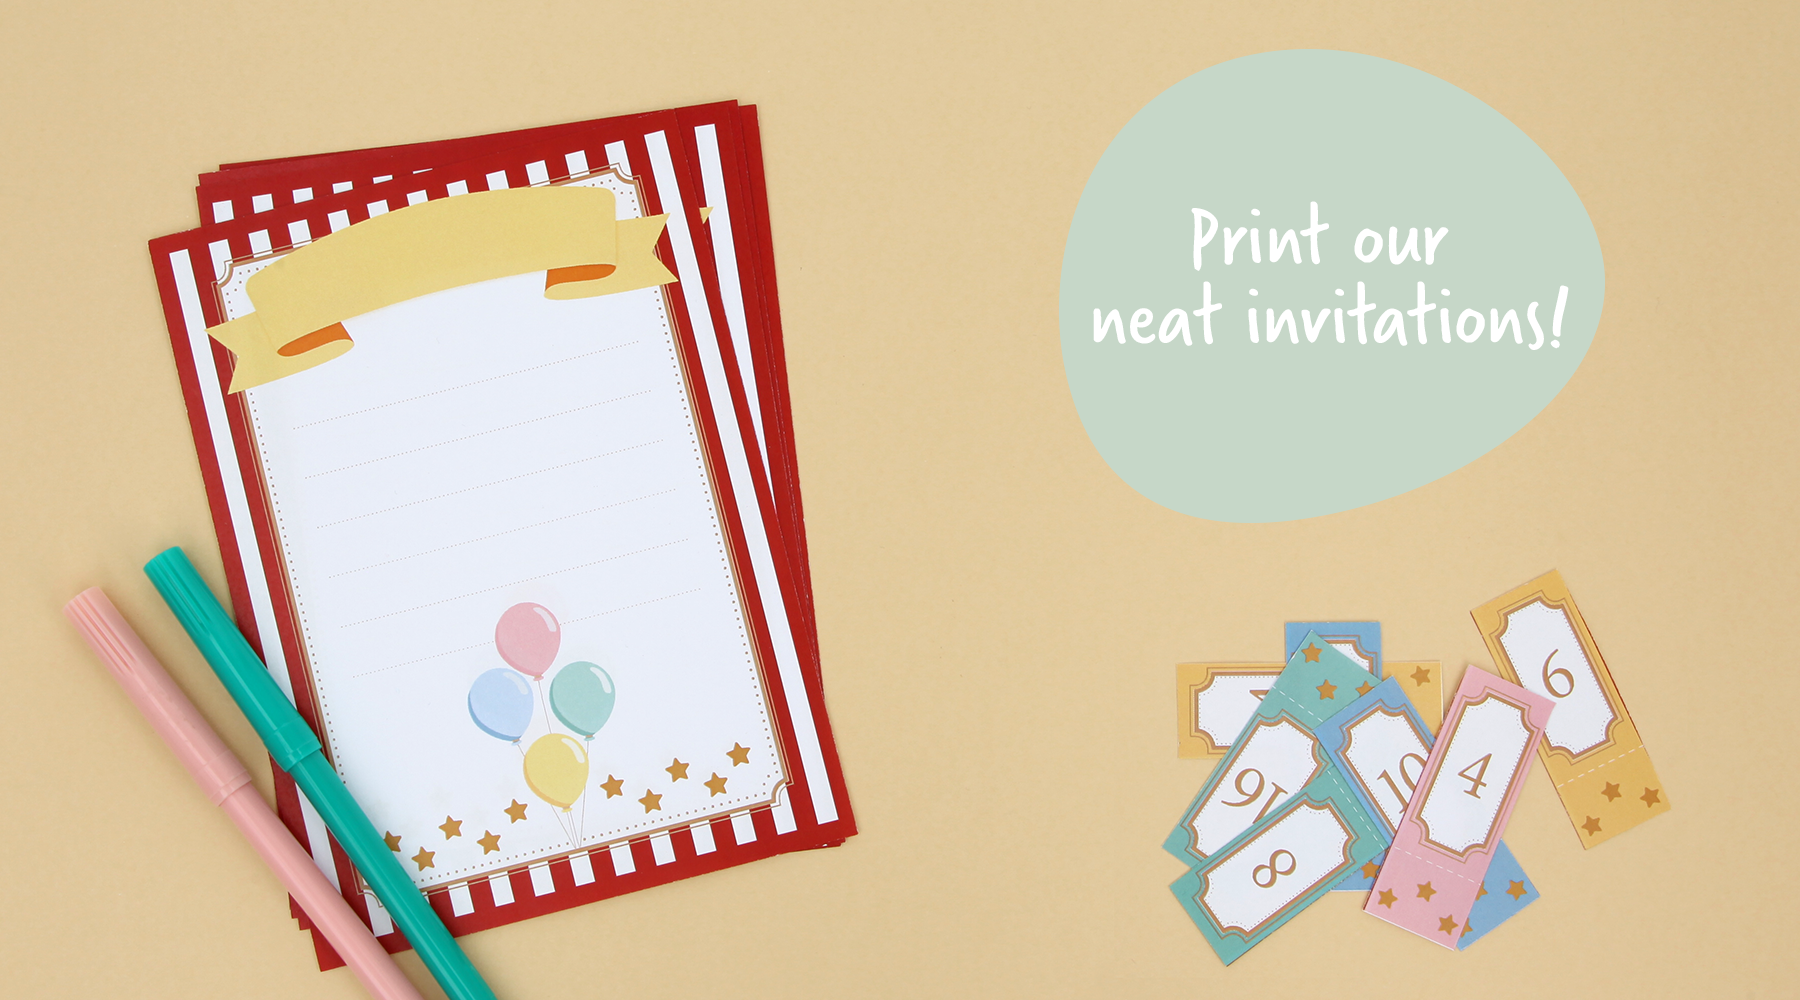 Print our neat invitations!